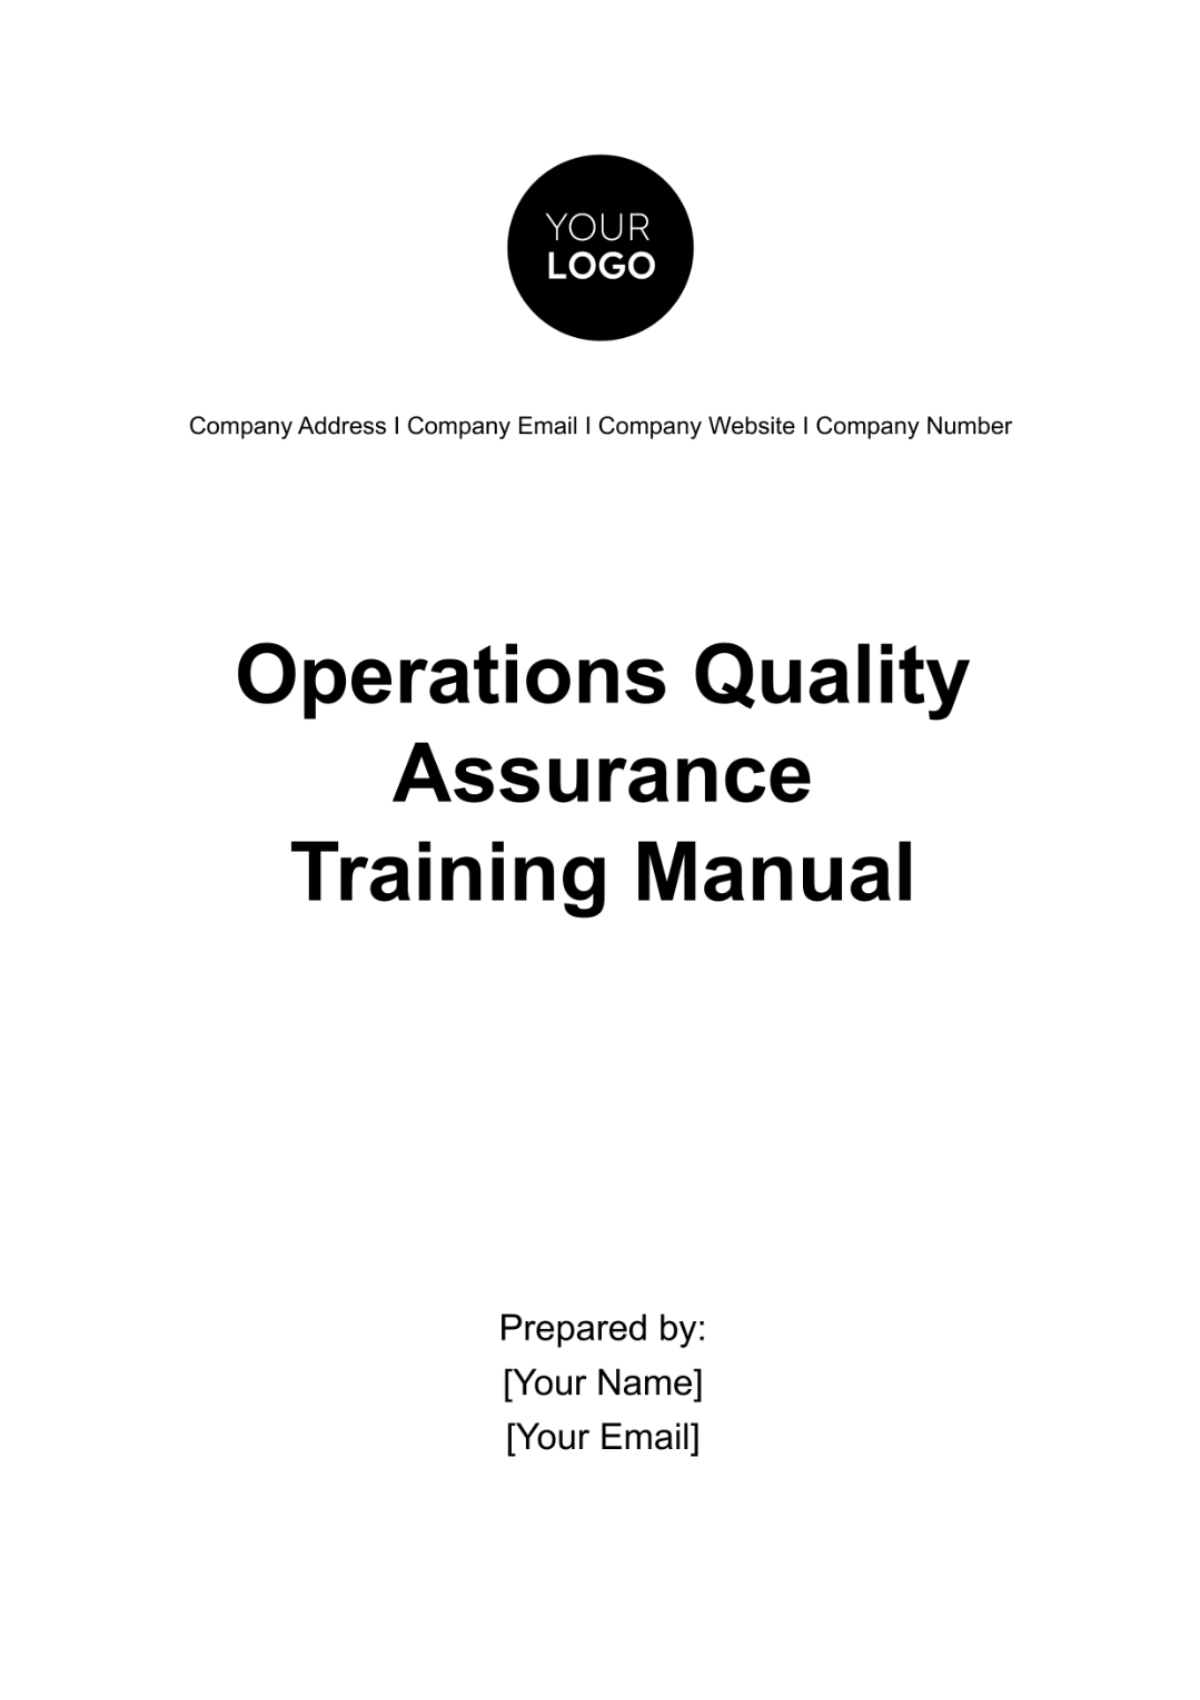  Operations Quality Assurance Training Manual Template